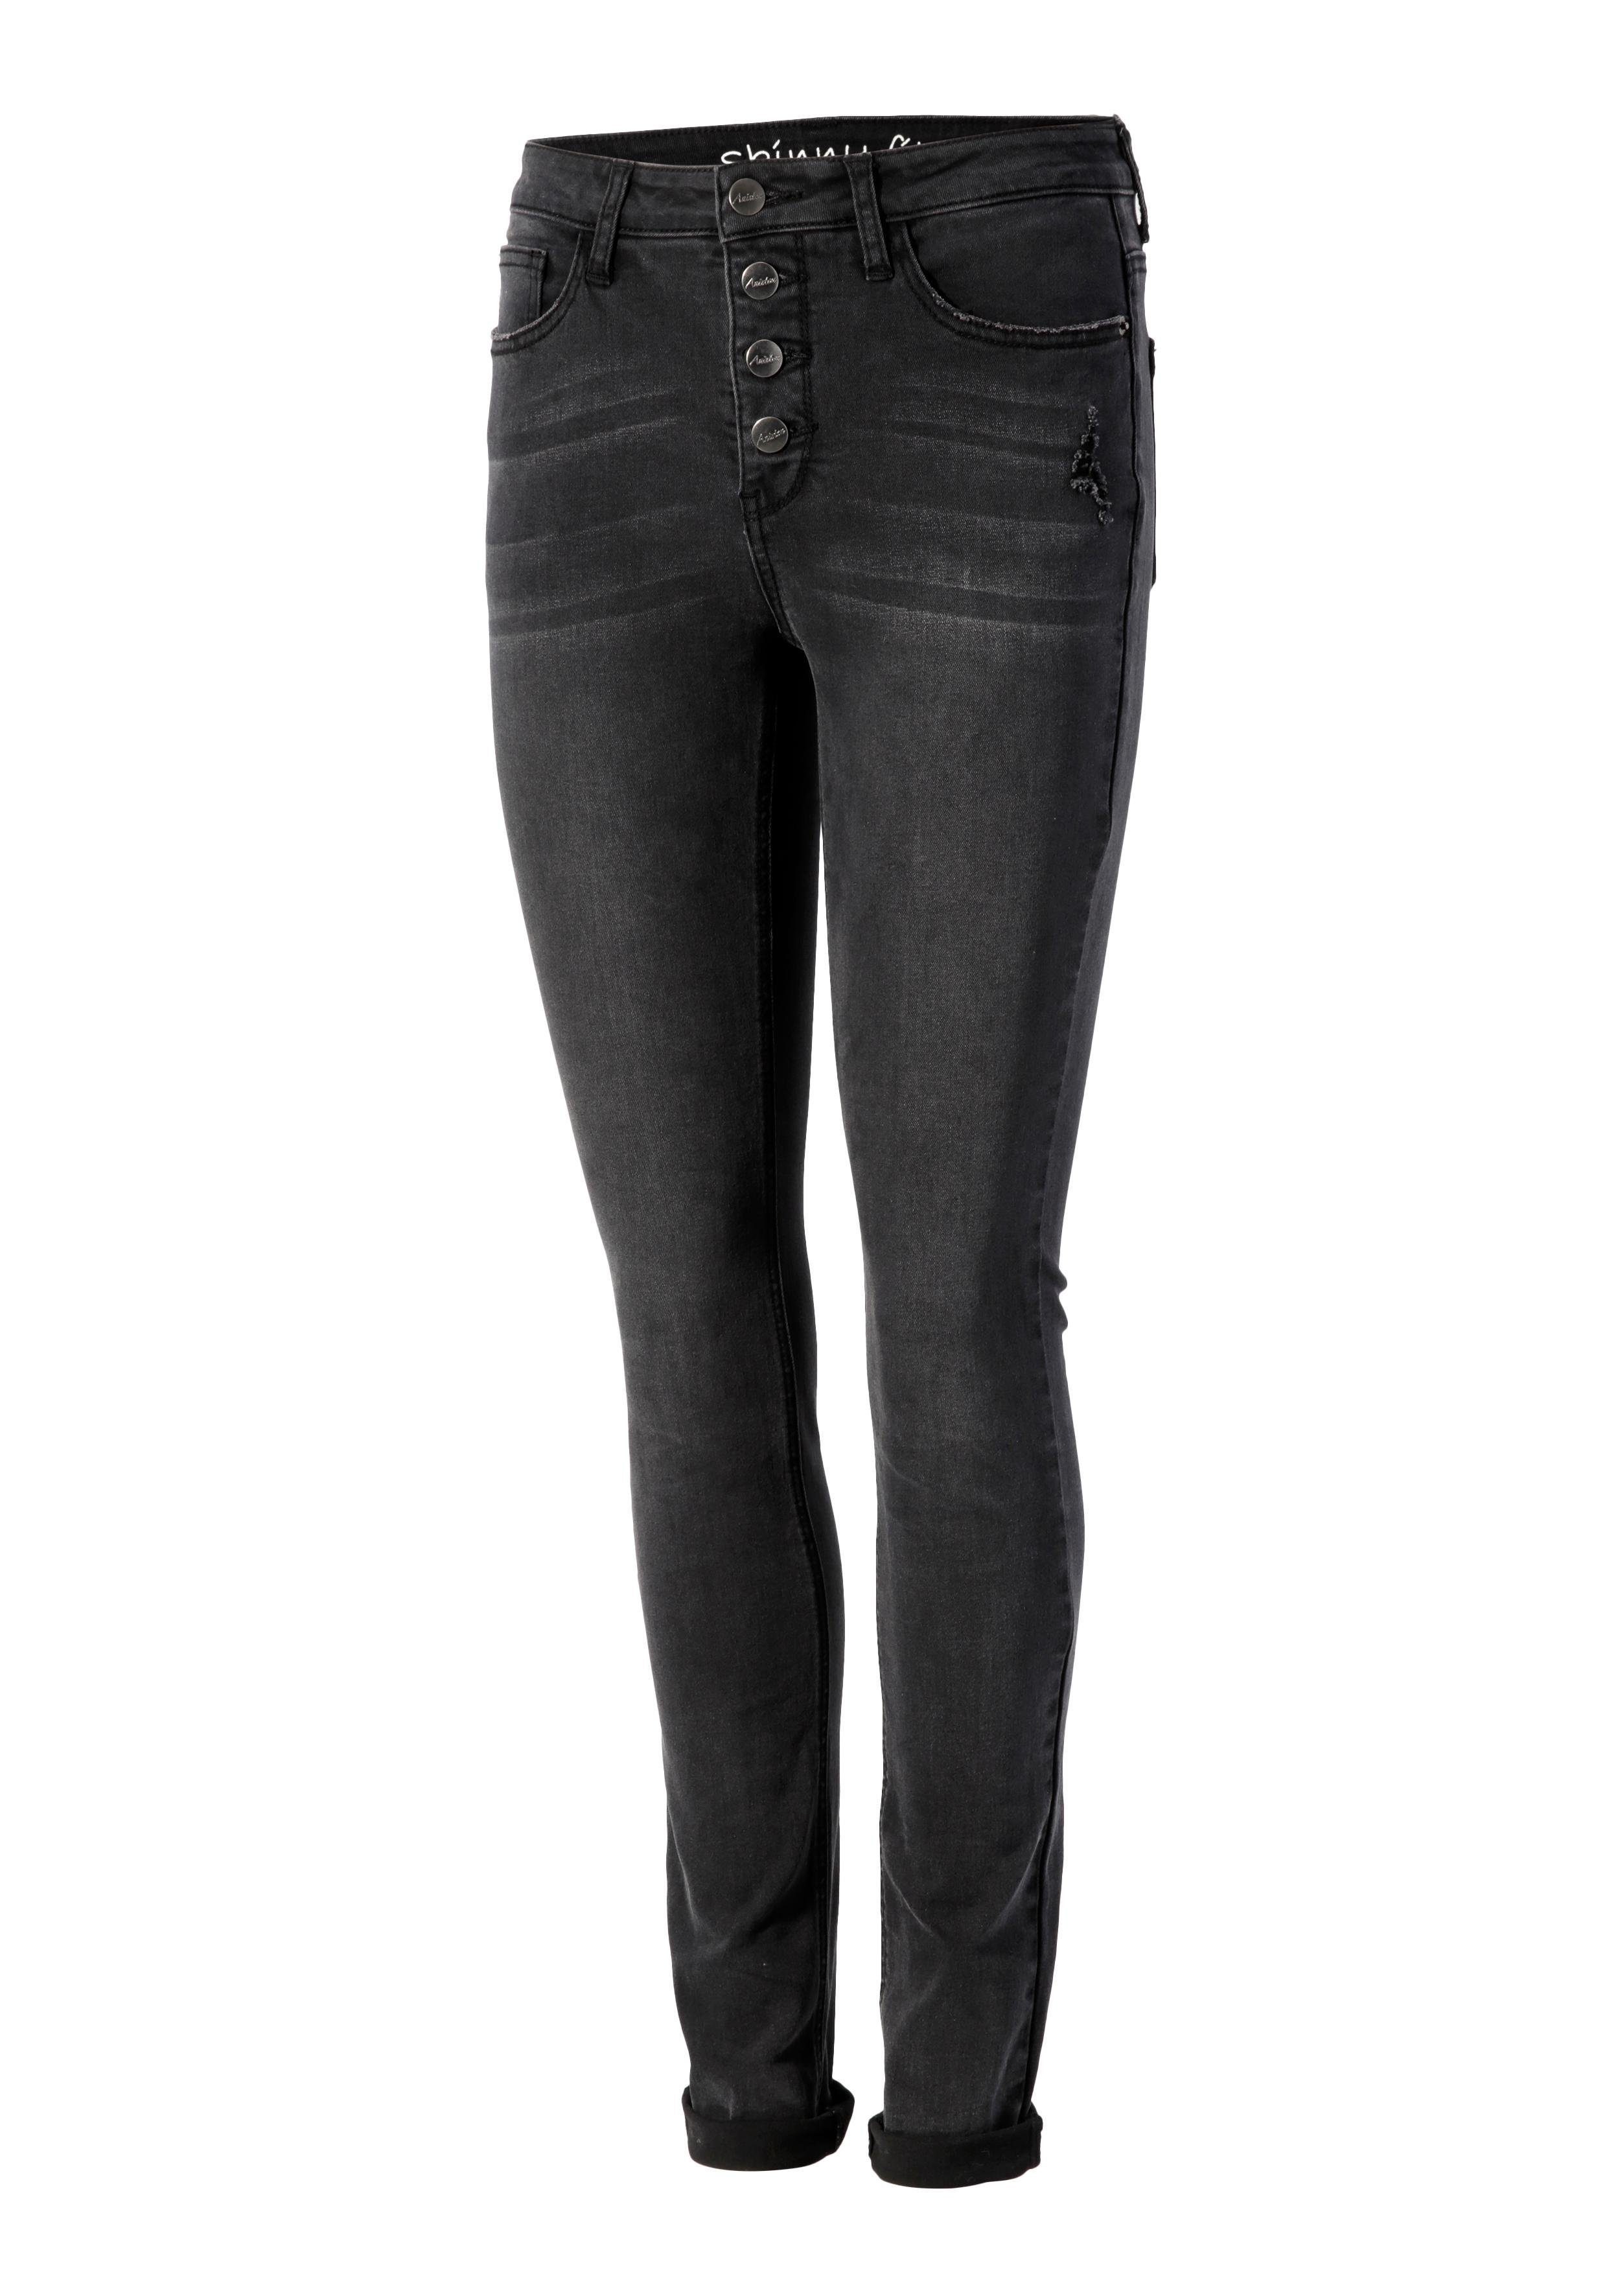 waist CASUAL Aniston Skinny-fit-Jeans regular